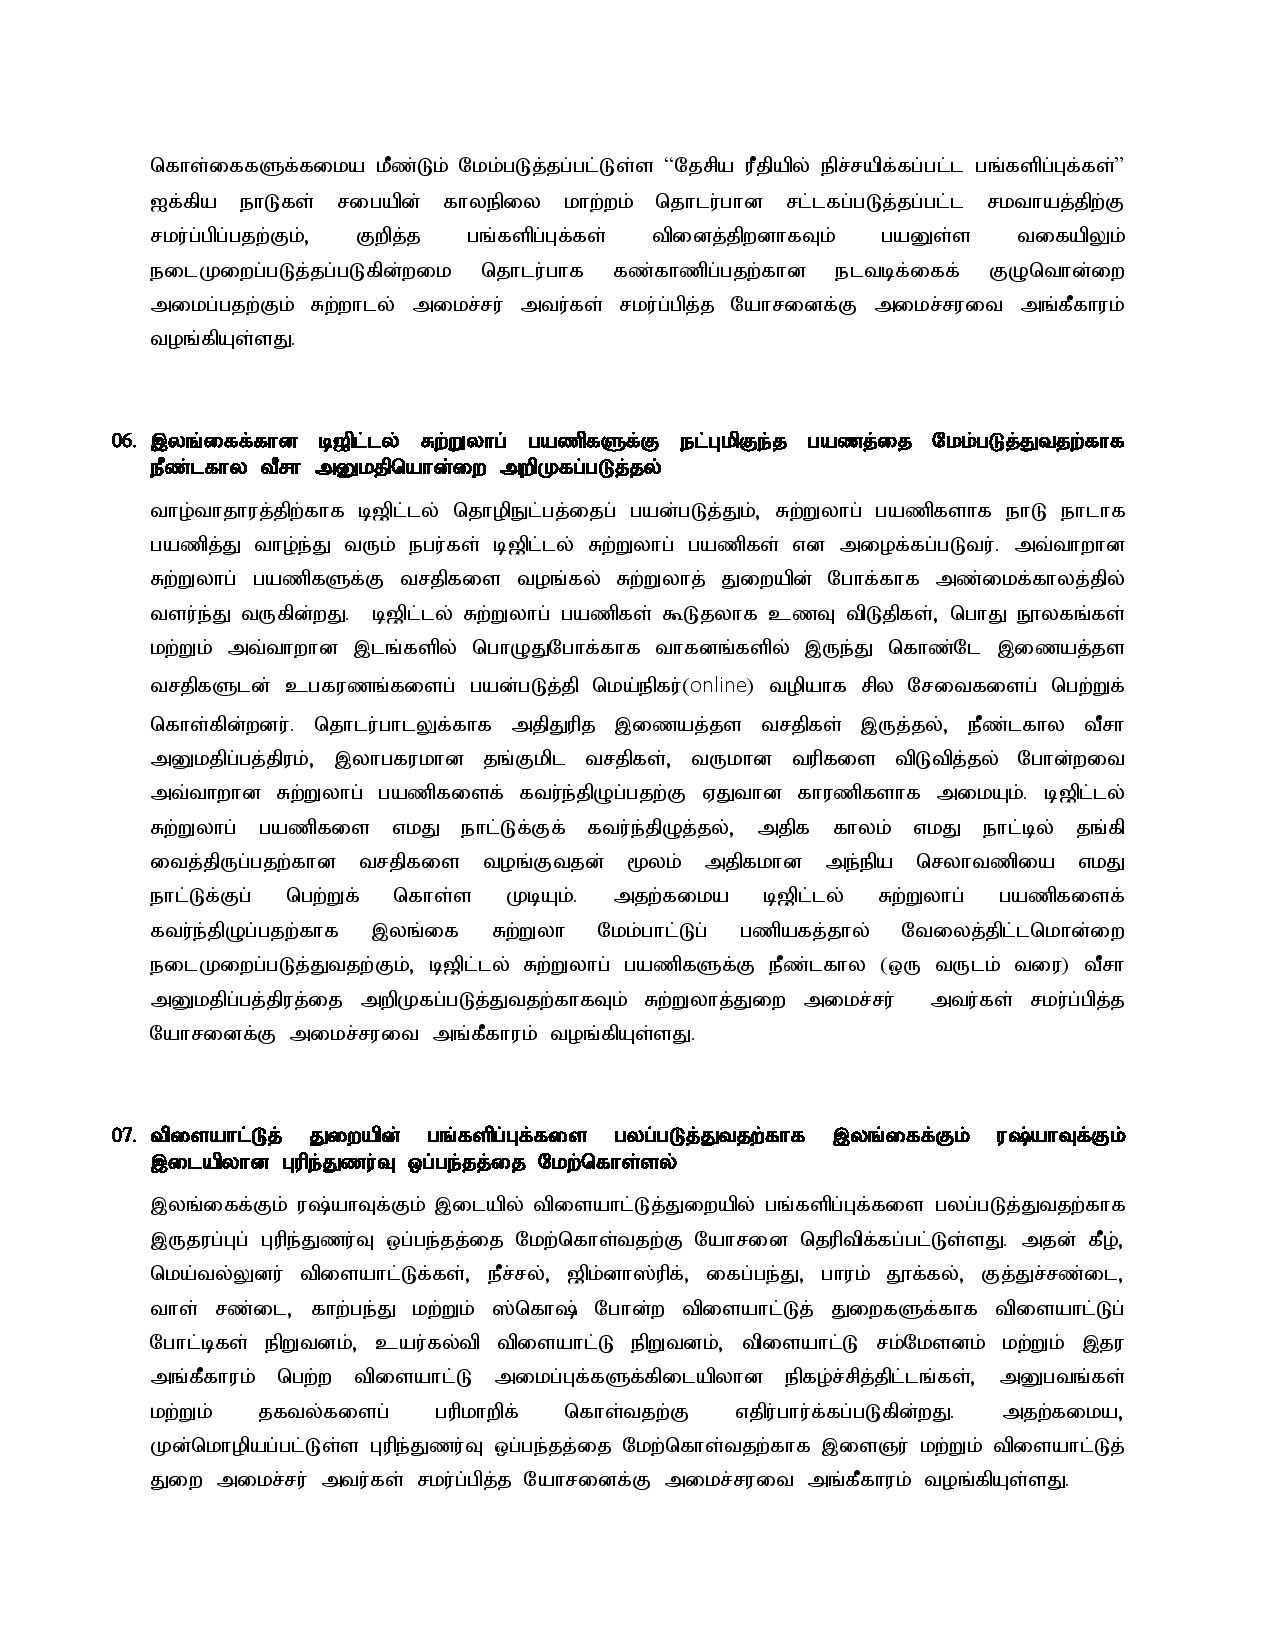 Cabinet Decision on 12.07.2021 Tamil page 003 2